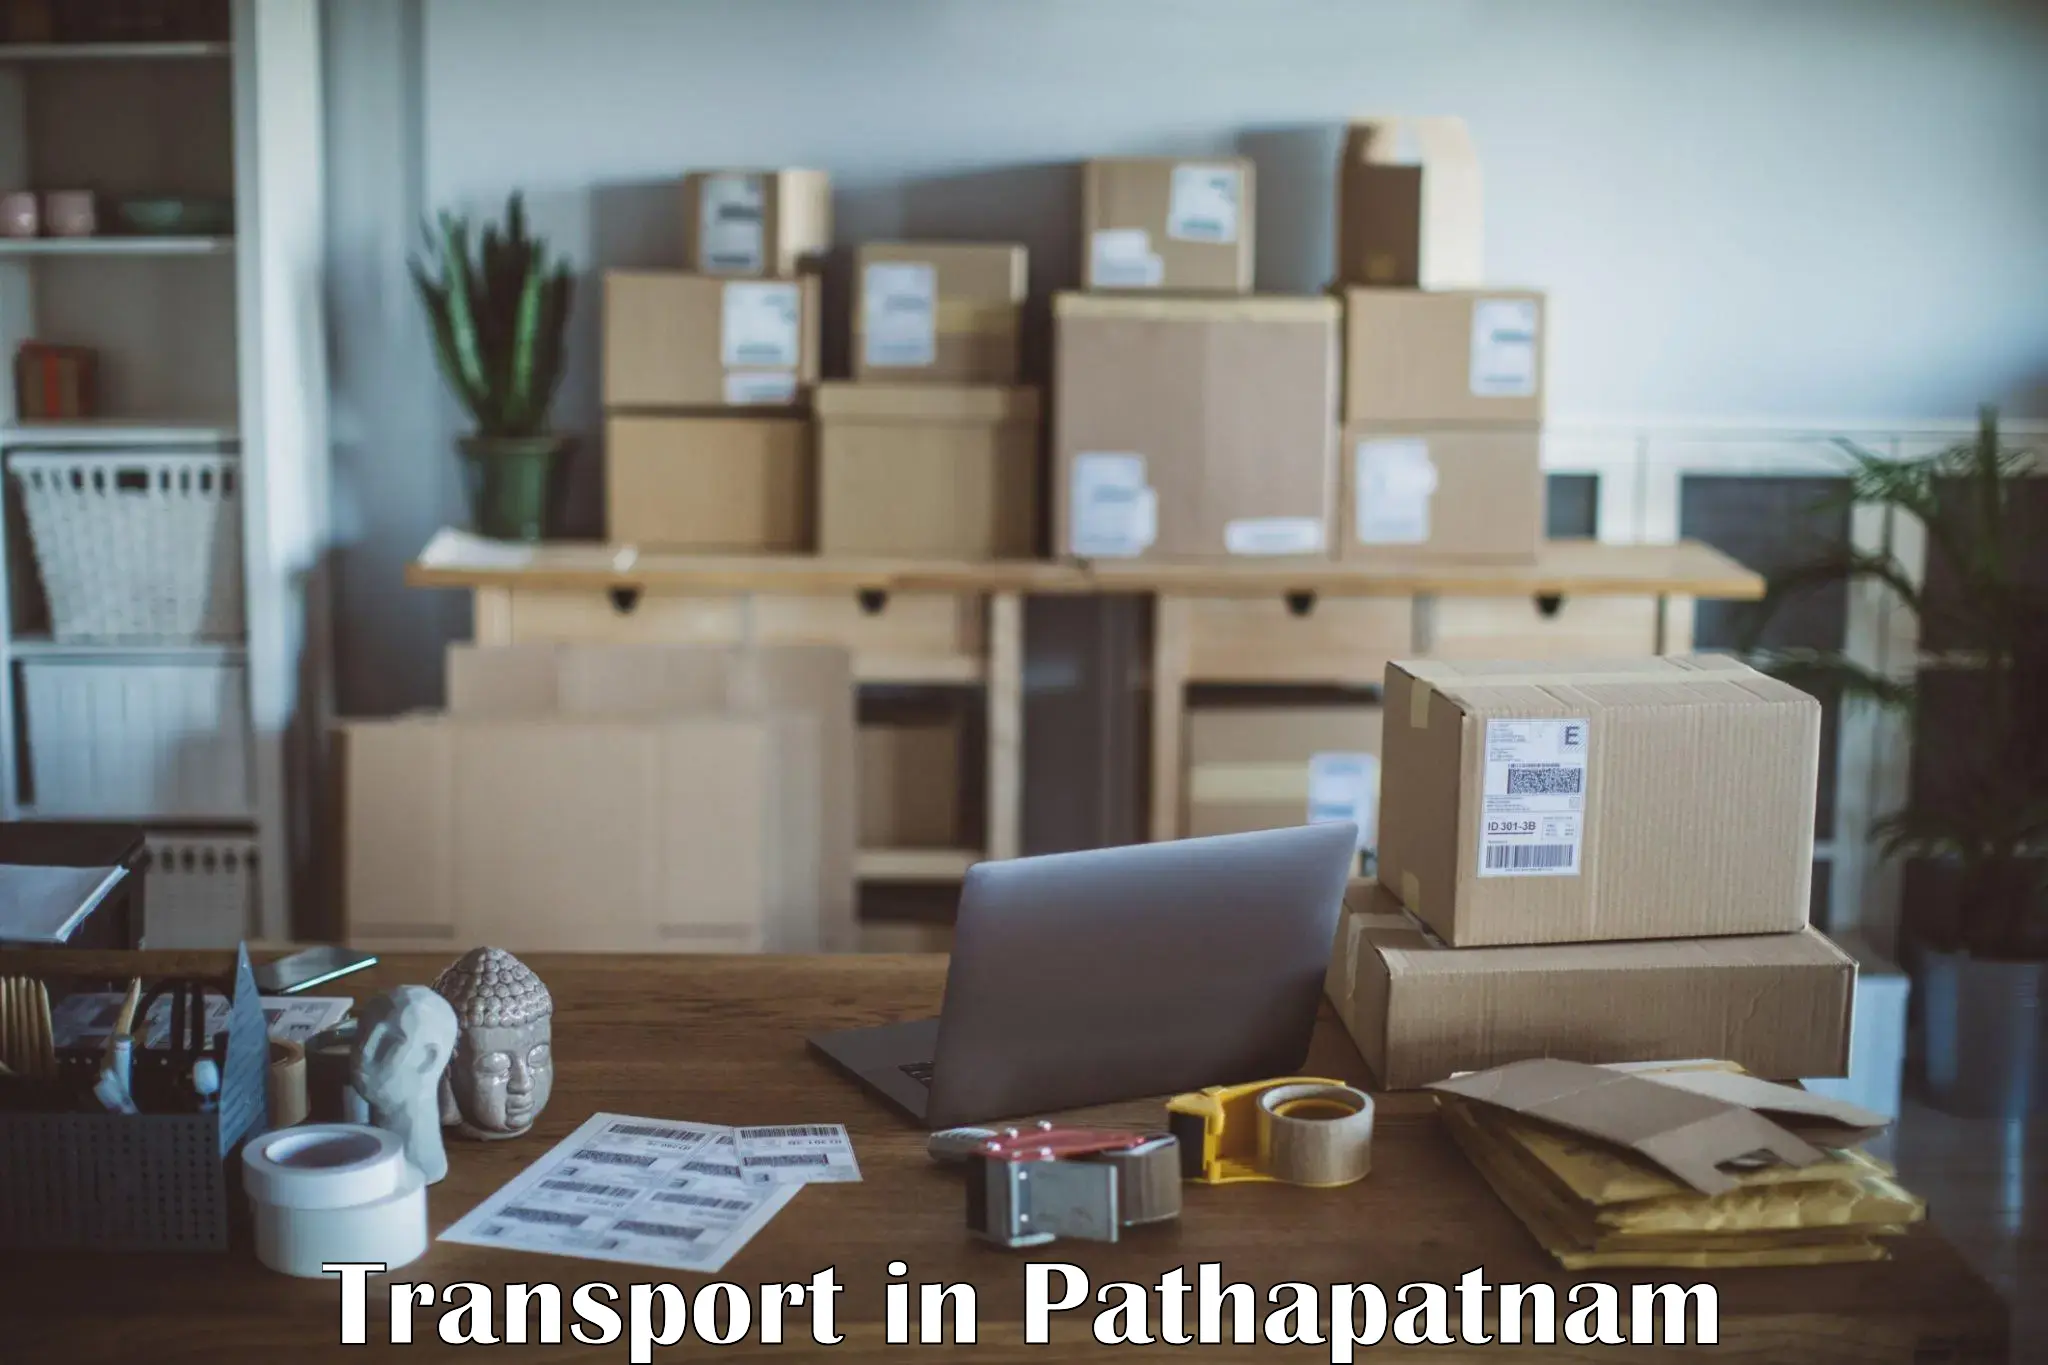 Domestic goods transportation services in Pathapatnam